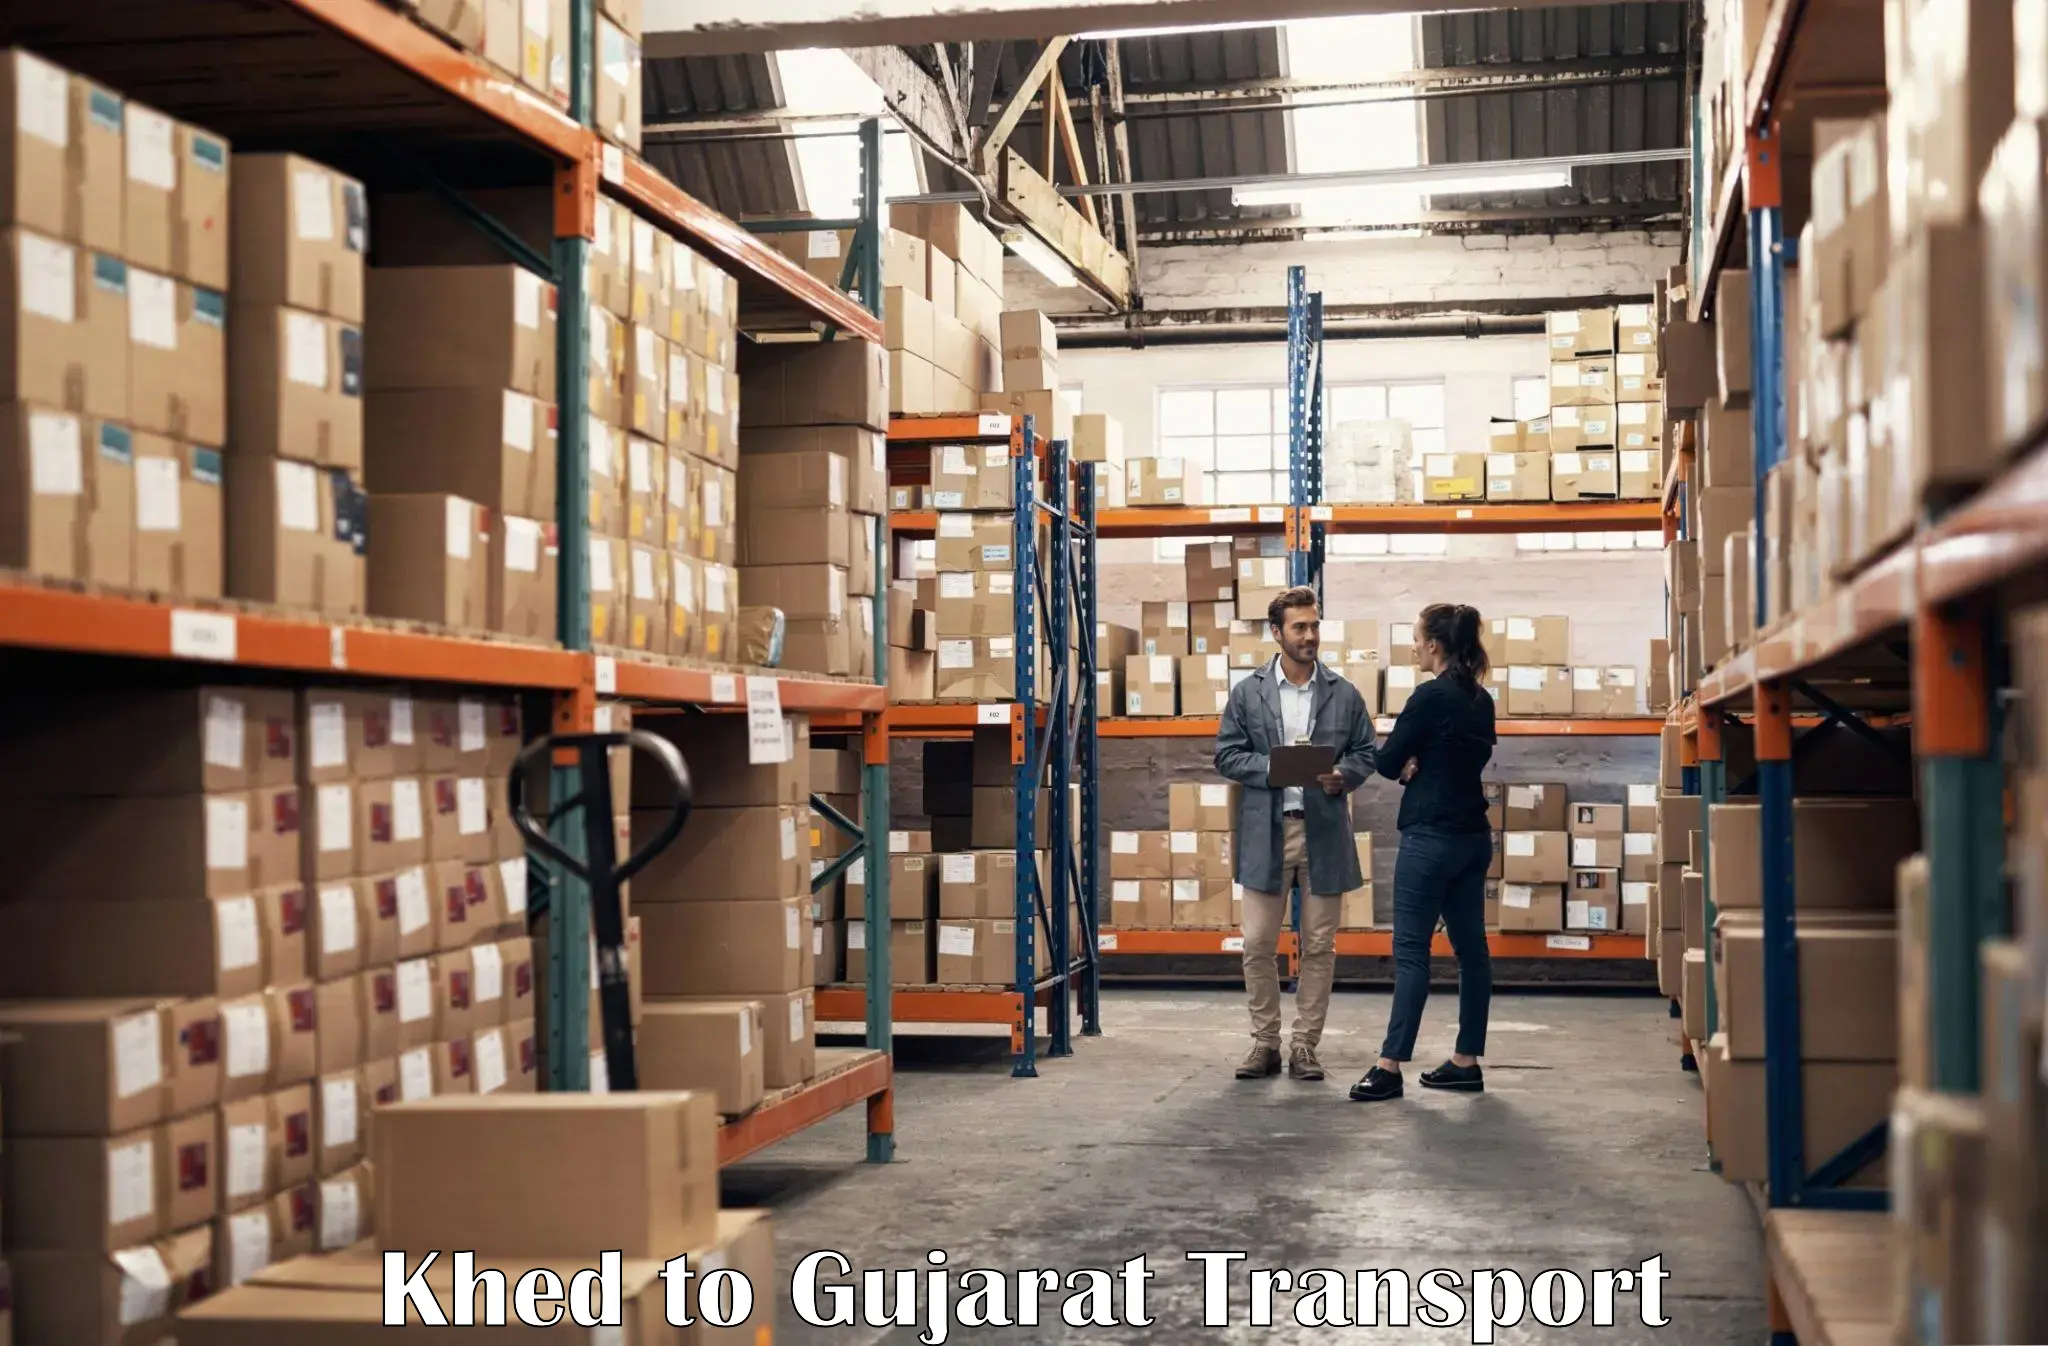 Daily parcel service transport Khed to Kachchh